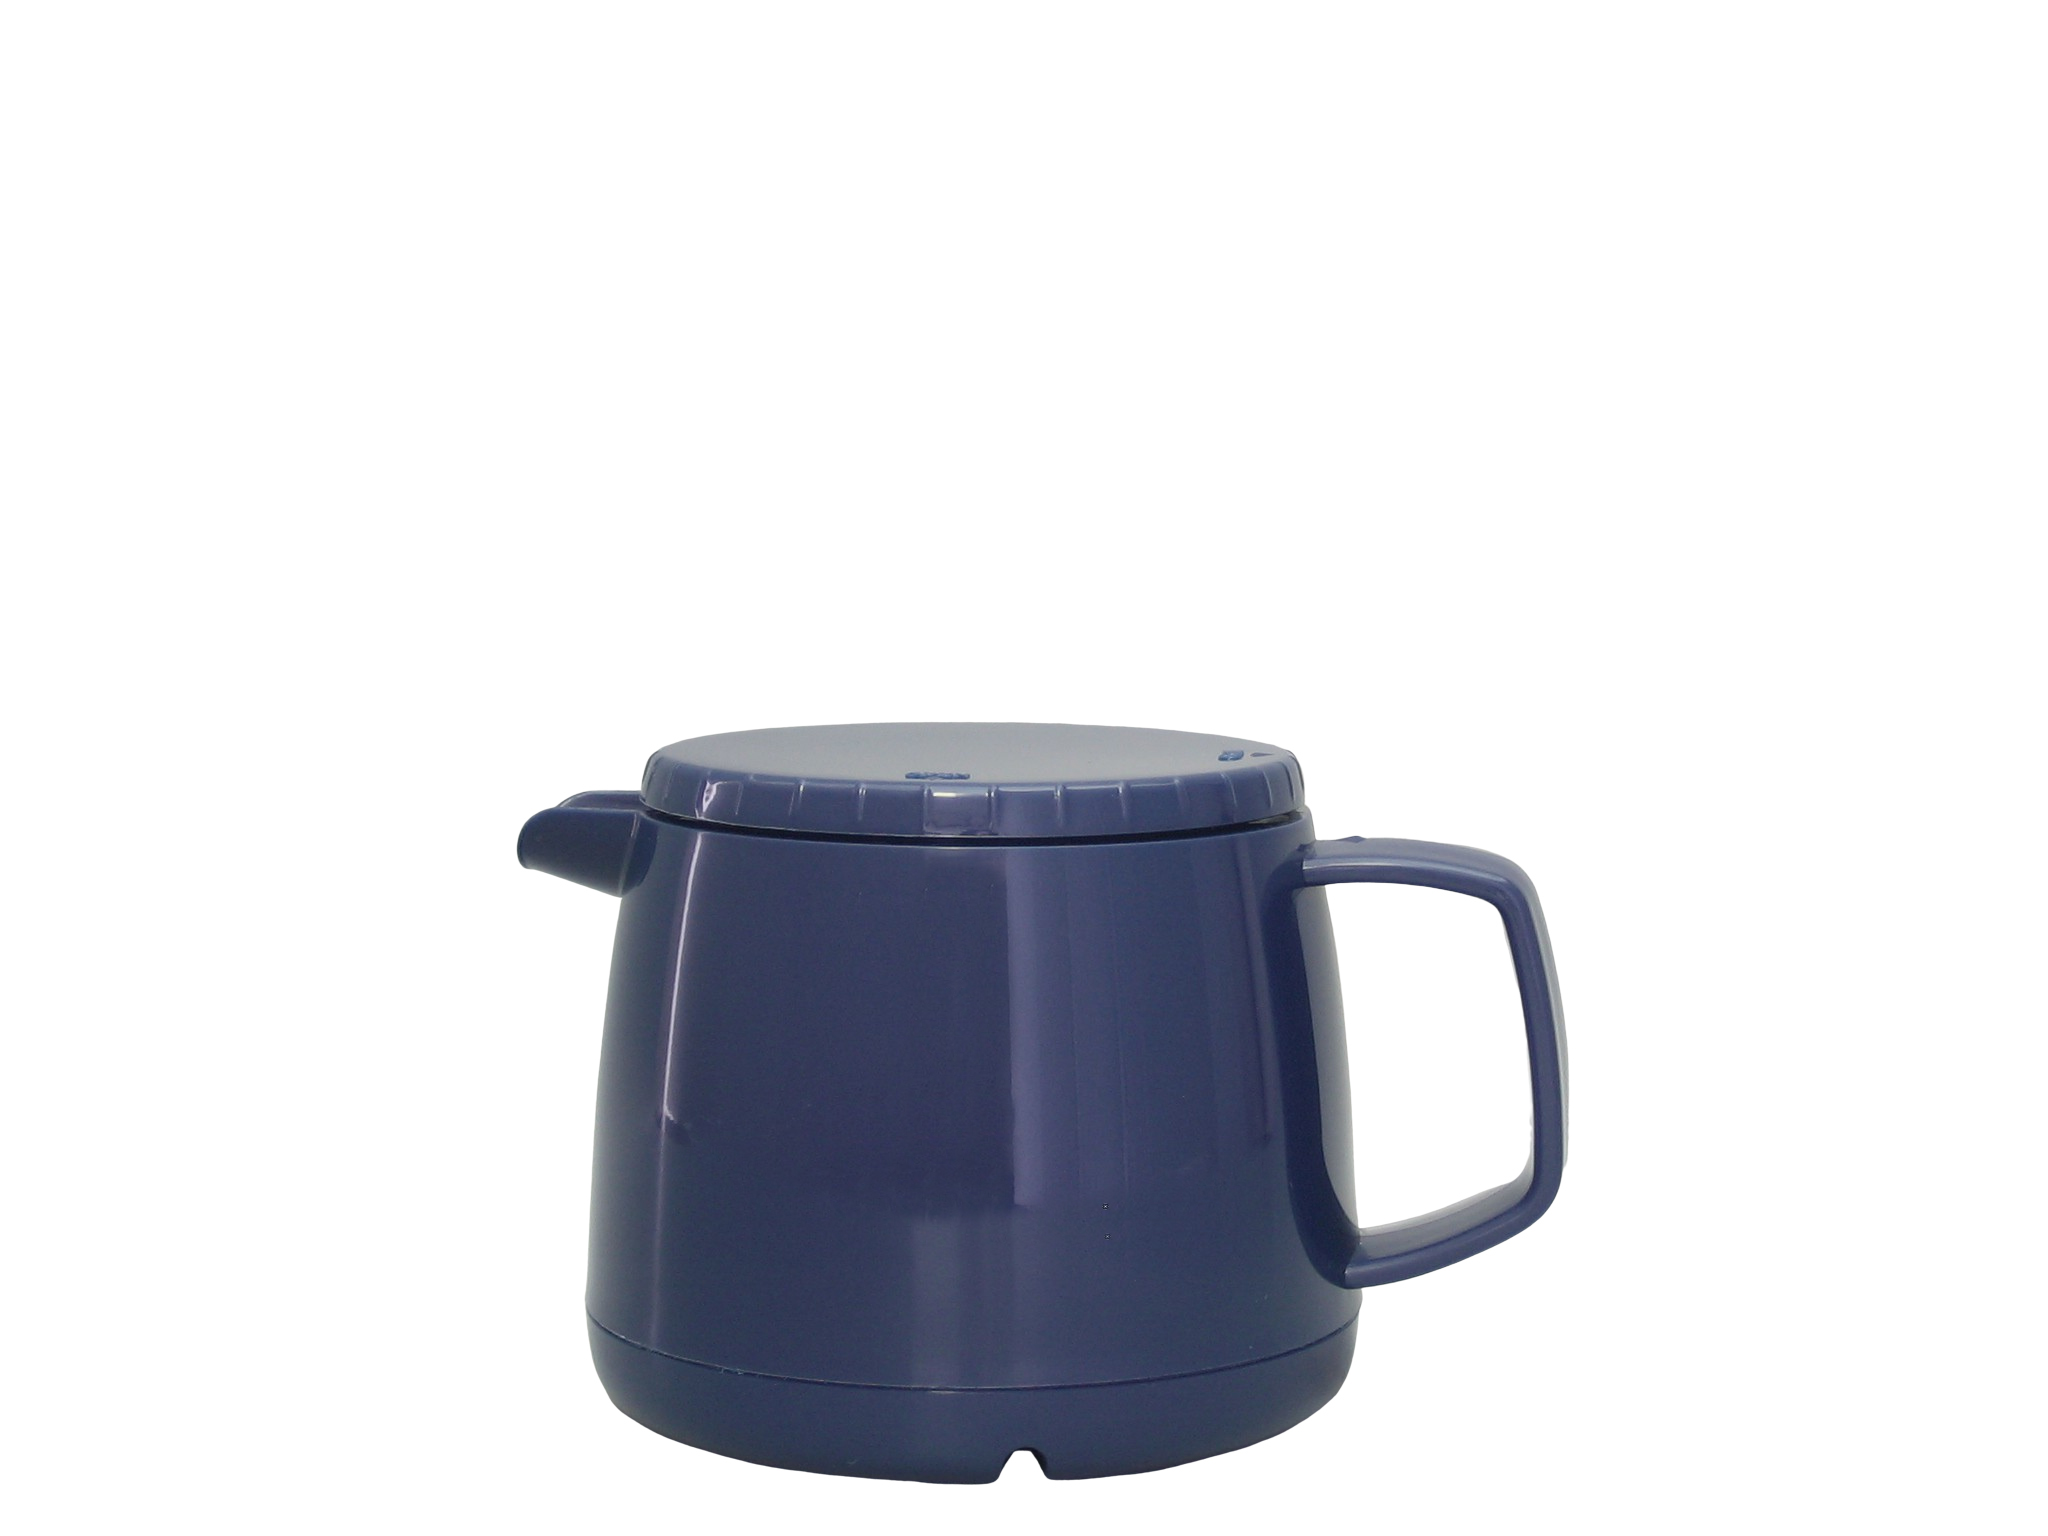 JAZZ030-008 - Insulated carafe low height stackable blue 0.30 L - Isobel